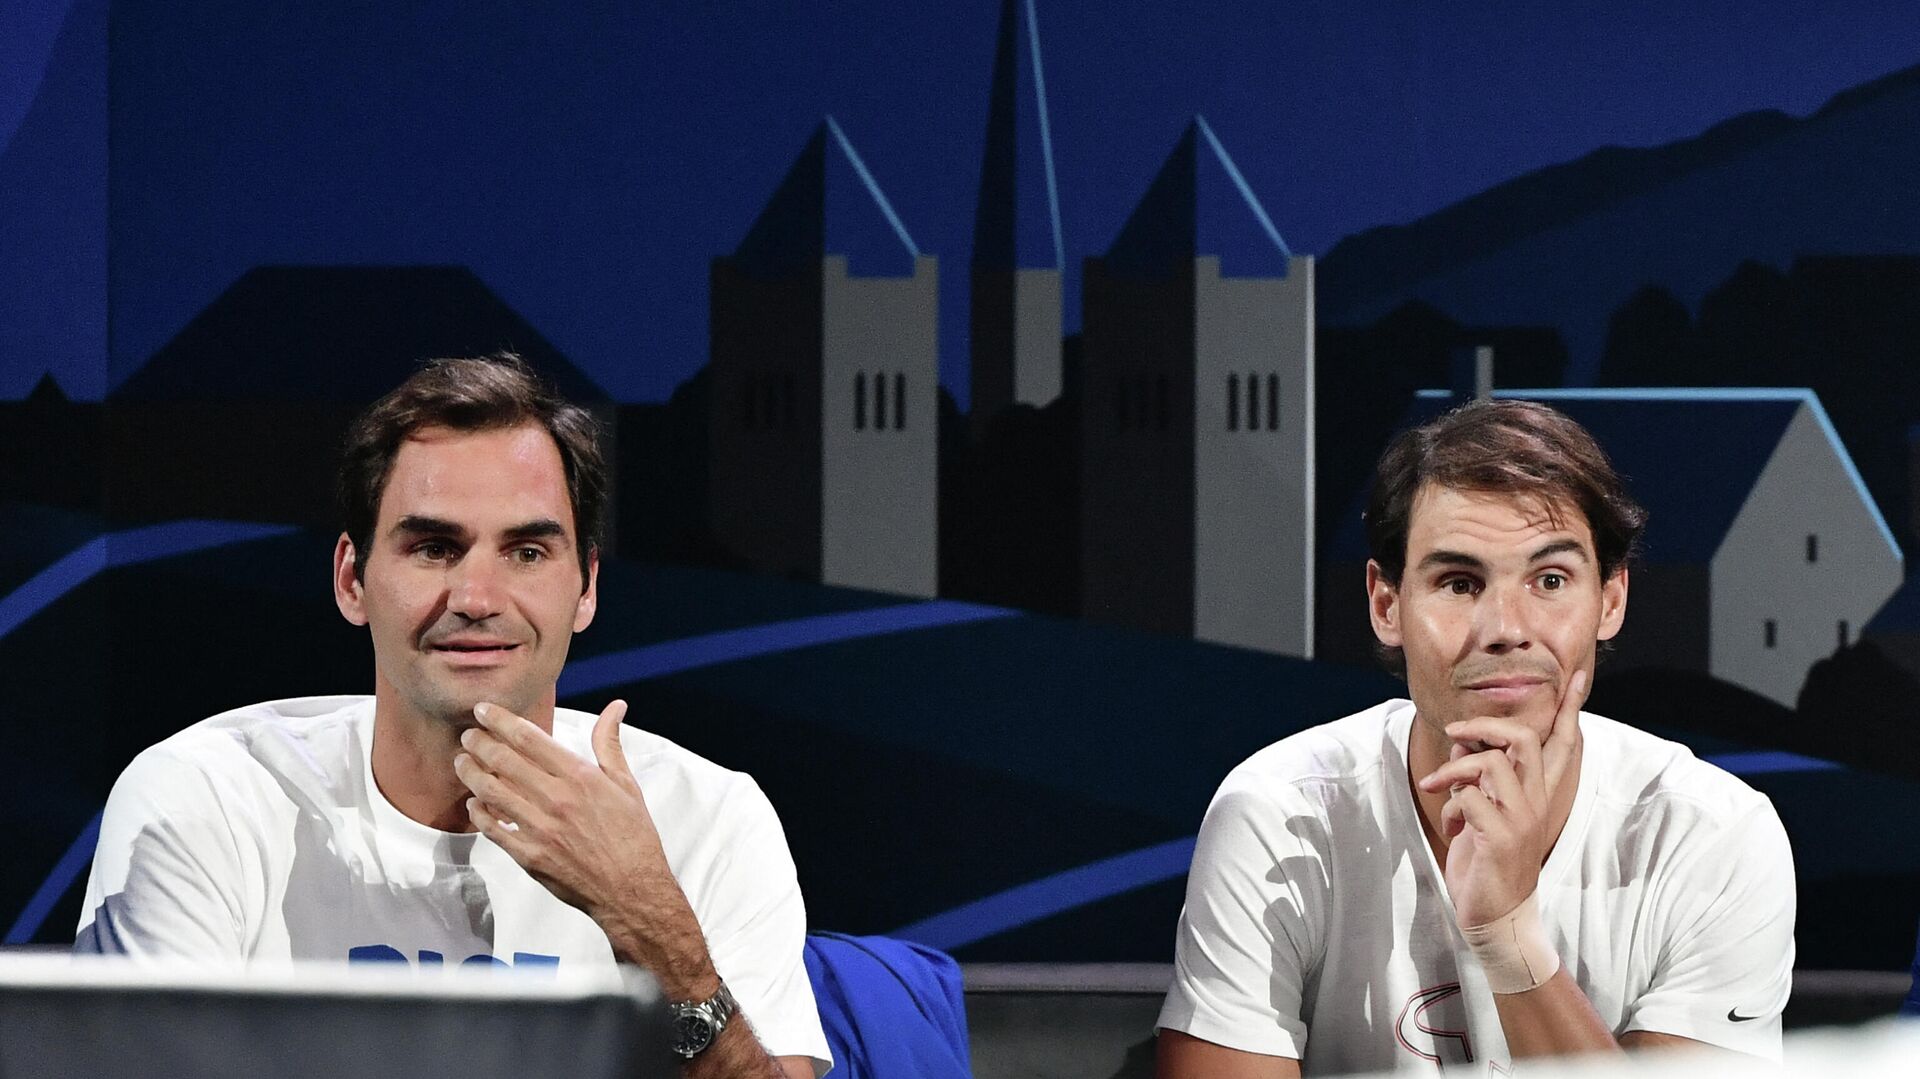 Team Europe's Roger Federer (L) and teammate Rafael Nadal watch a match as part of the 2019 Laver Cup tennis tournament in Geneva, on September 20, 2019 - Sputnik International, 1920, 13.09.2021